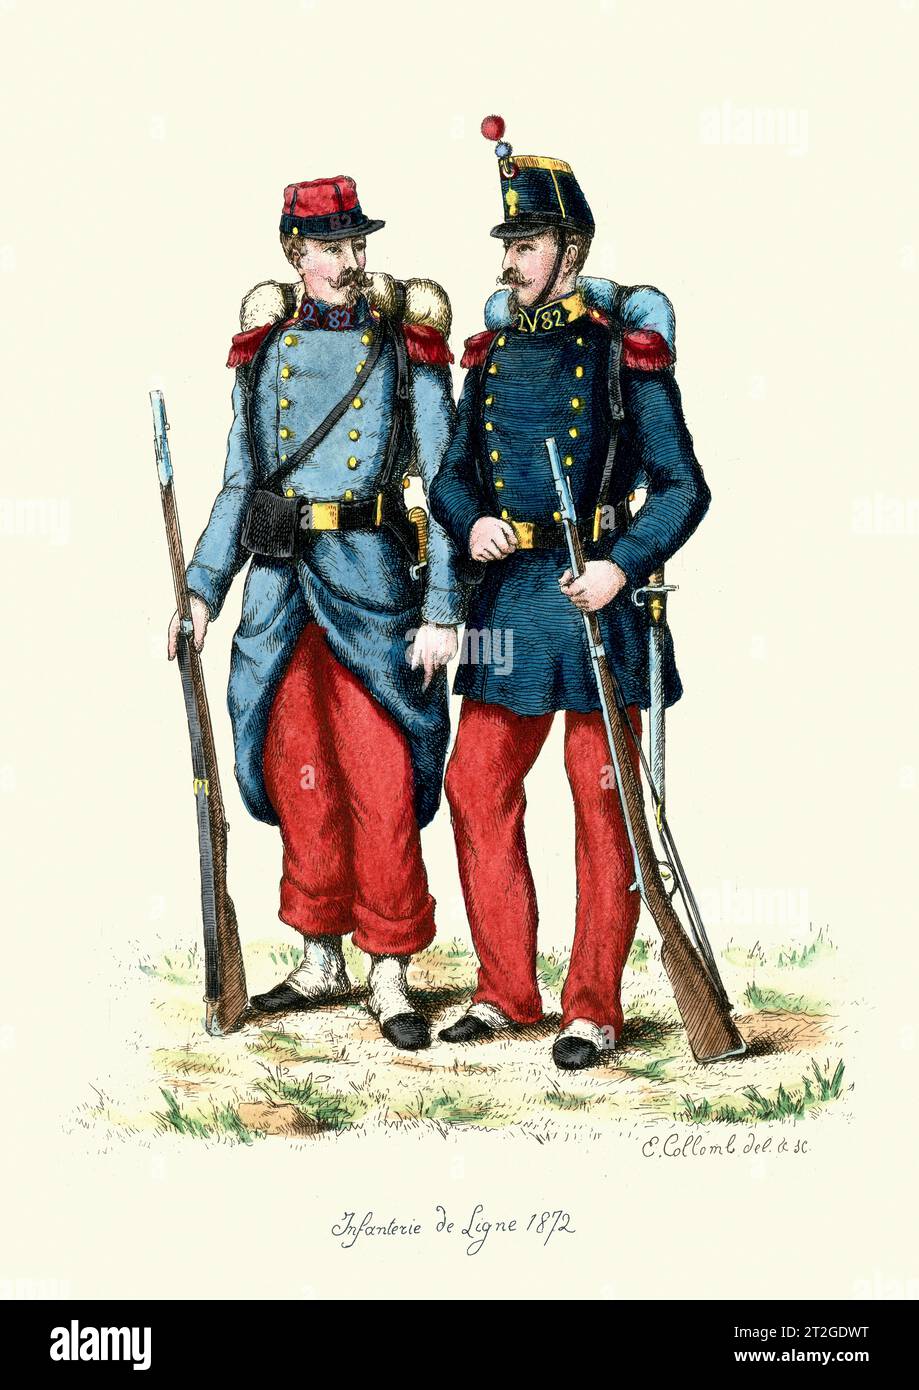 French Military Uniforms, 19th Century, History, Infantry soliders, 1870s, Infanterie de Ligne Stock Photo